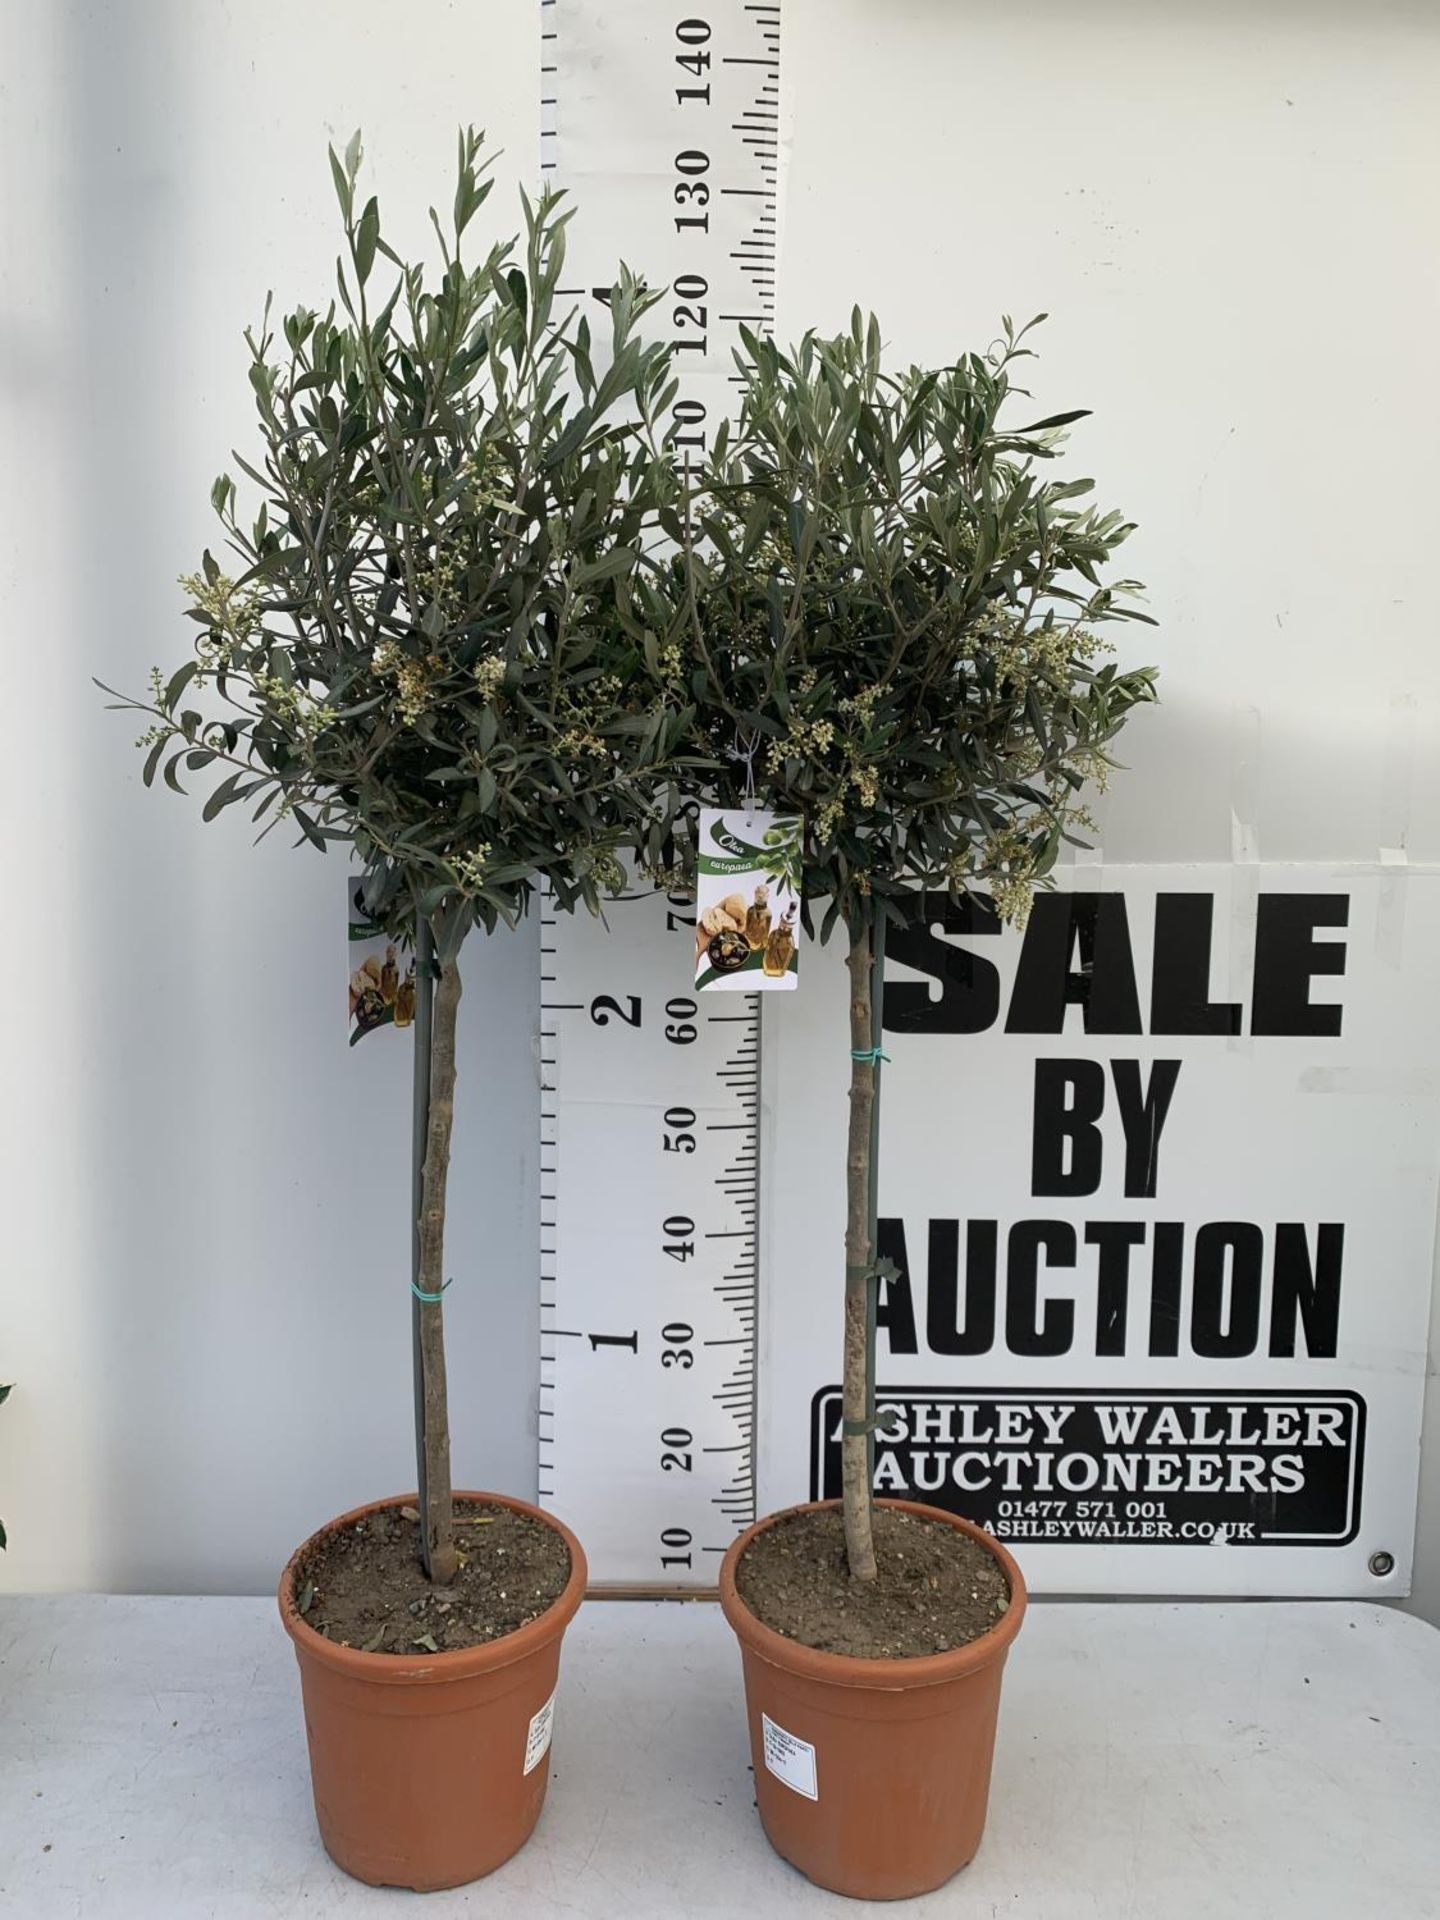 TWO OLIVE EUROPEA STANDARD TREES APPROX 120CM IN HEIGHT IN 3LTR POTS NO VAT TO BE SOLD FOR THE TWO - Bild 2 aus 6